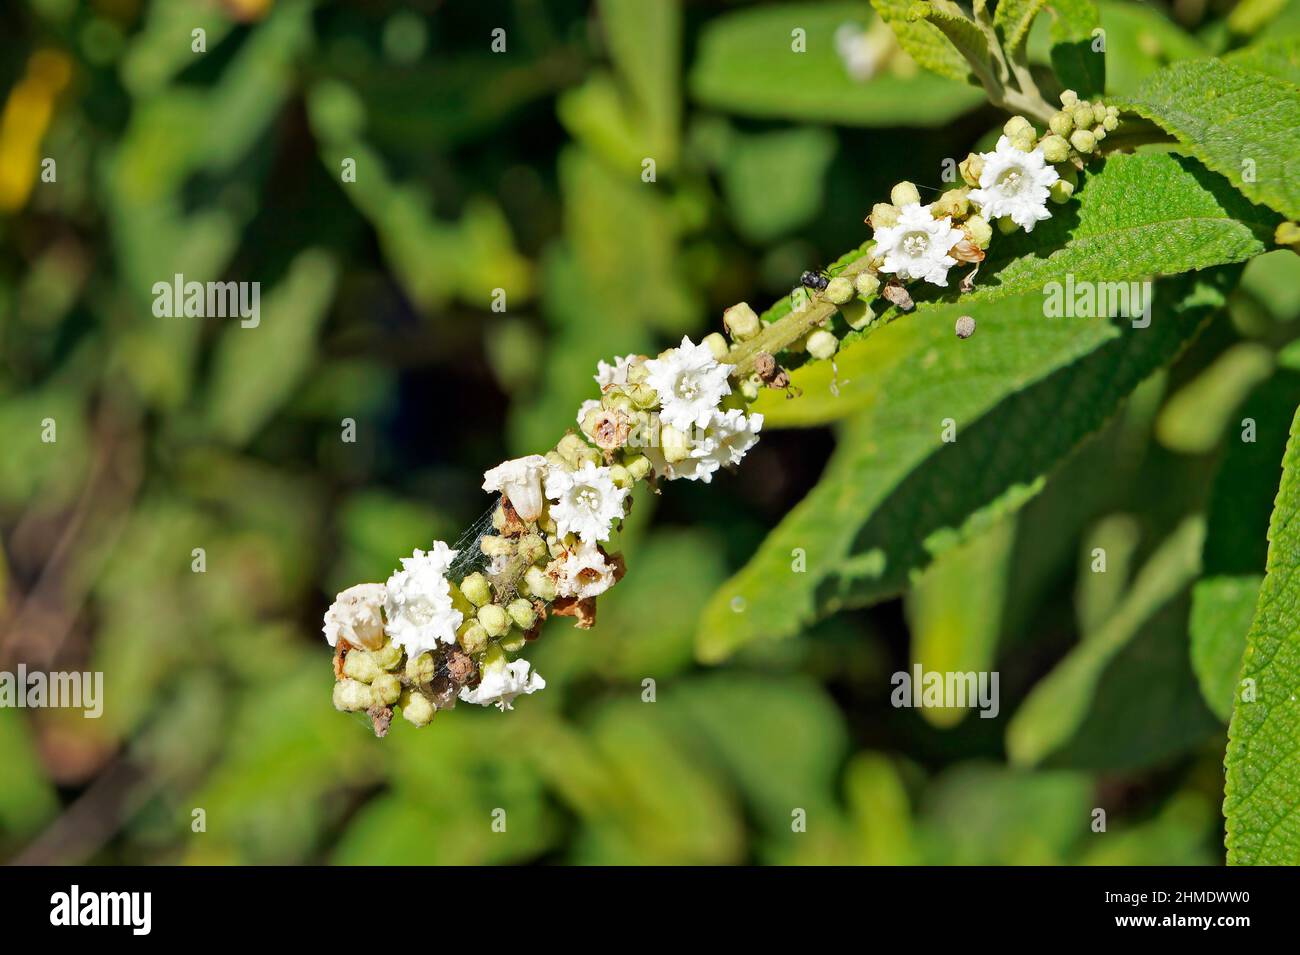 Black sage or wild sage flowers (Varronia curassavica or Cordia curassavica) on tropical forest Stock Photo